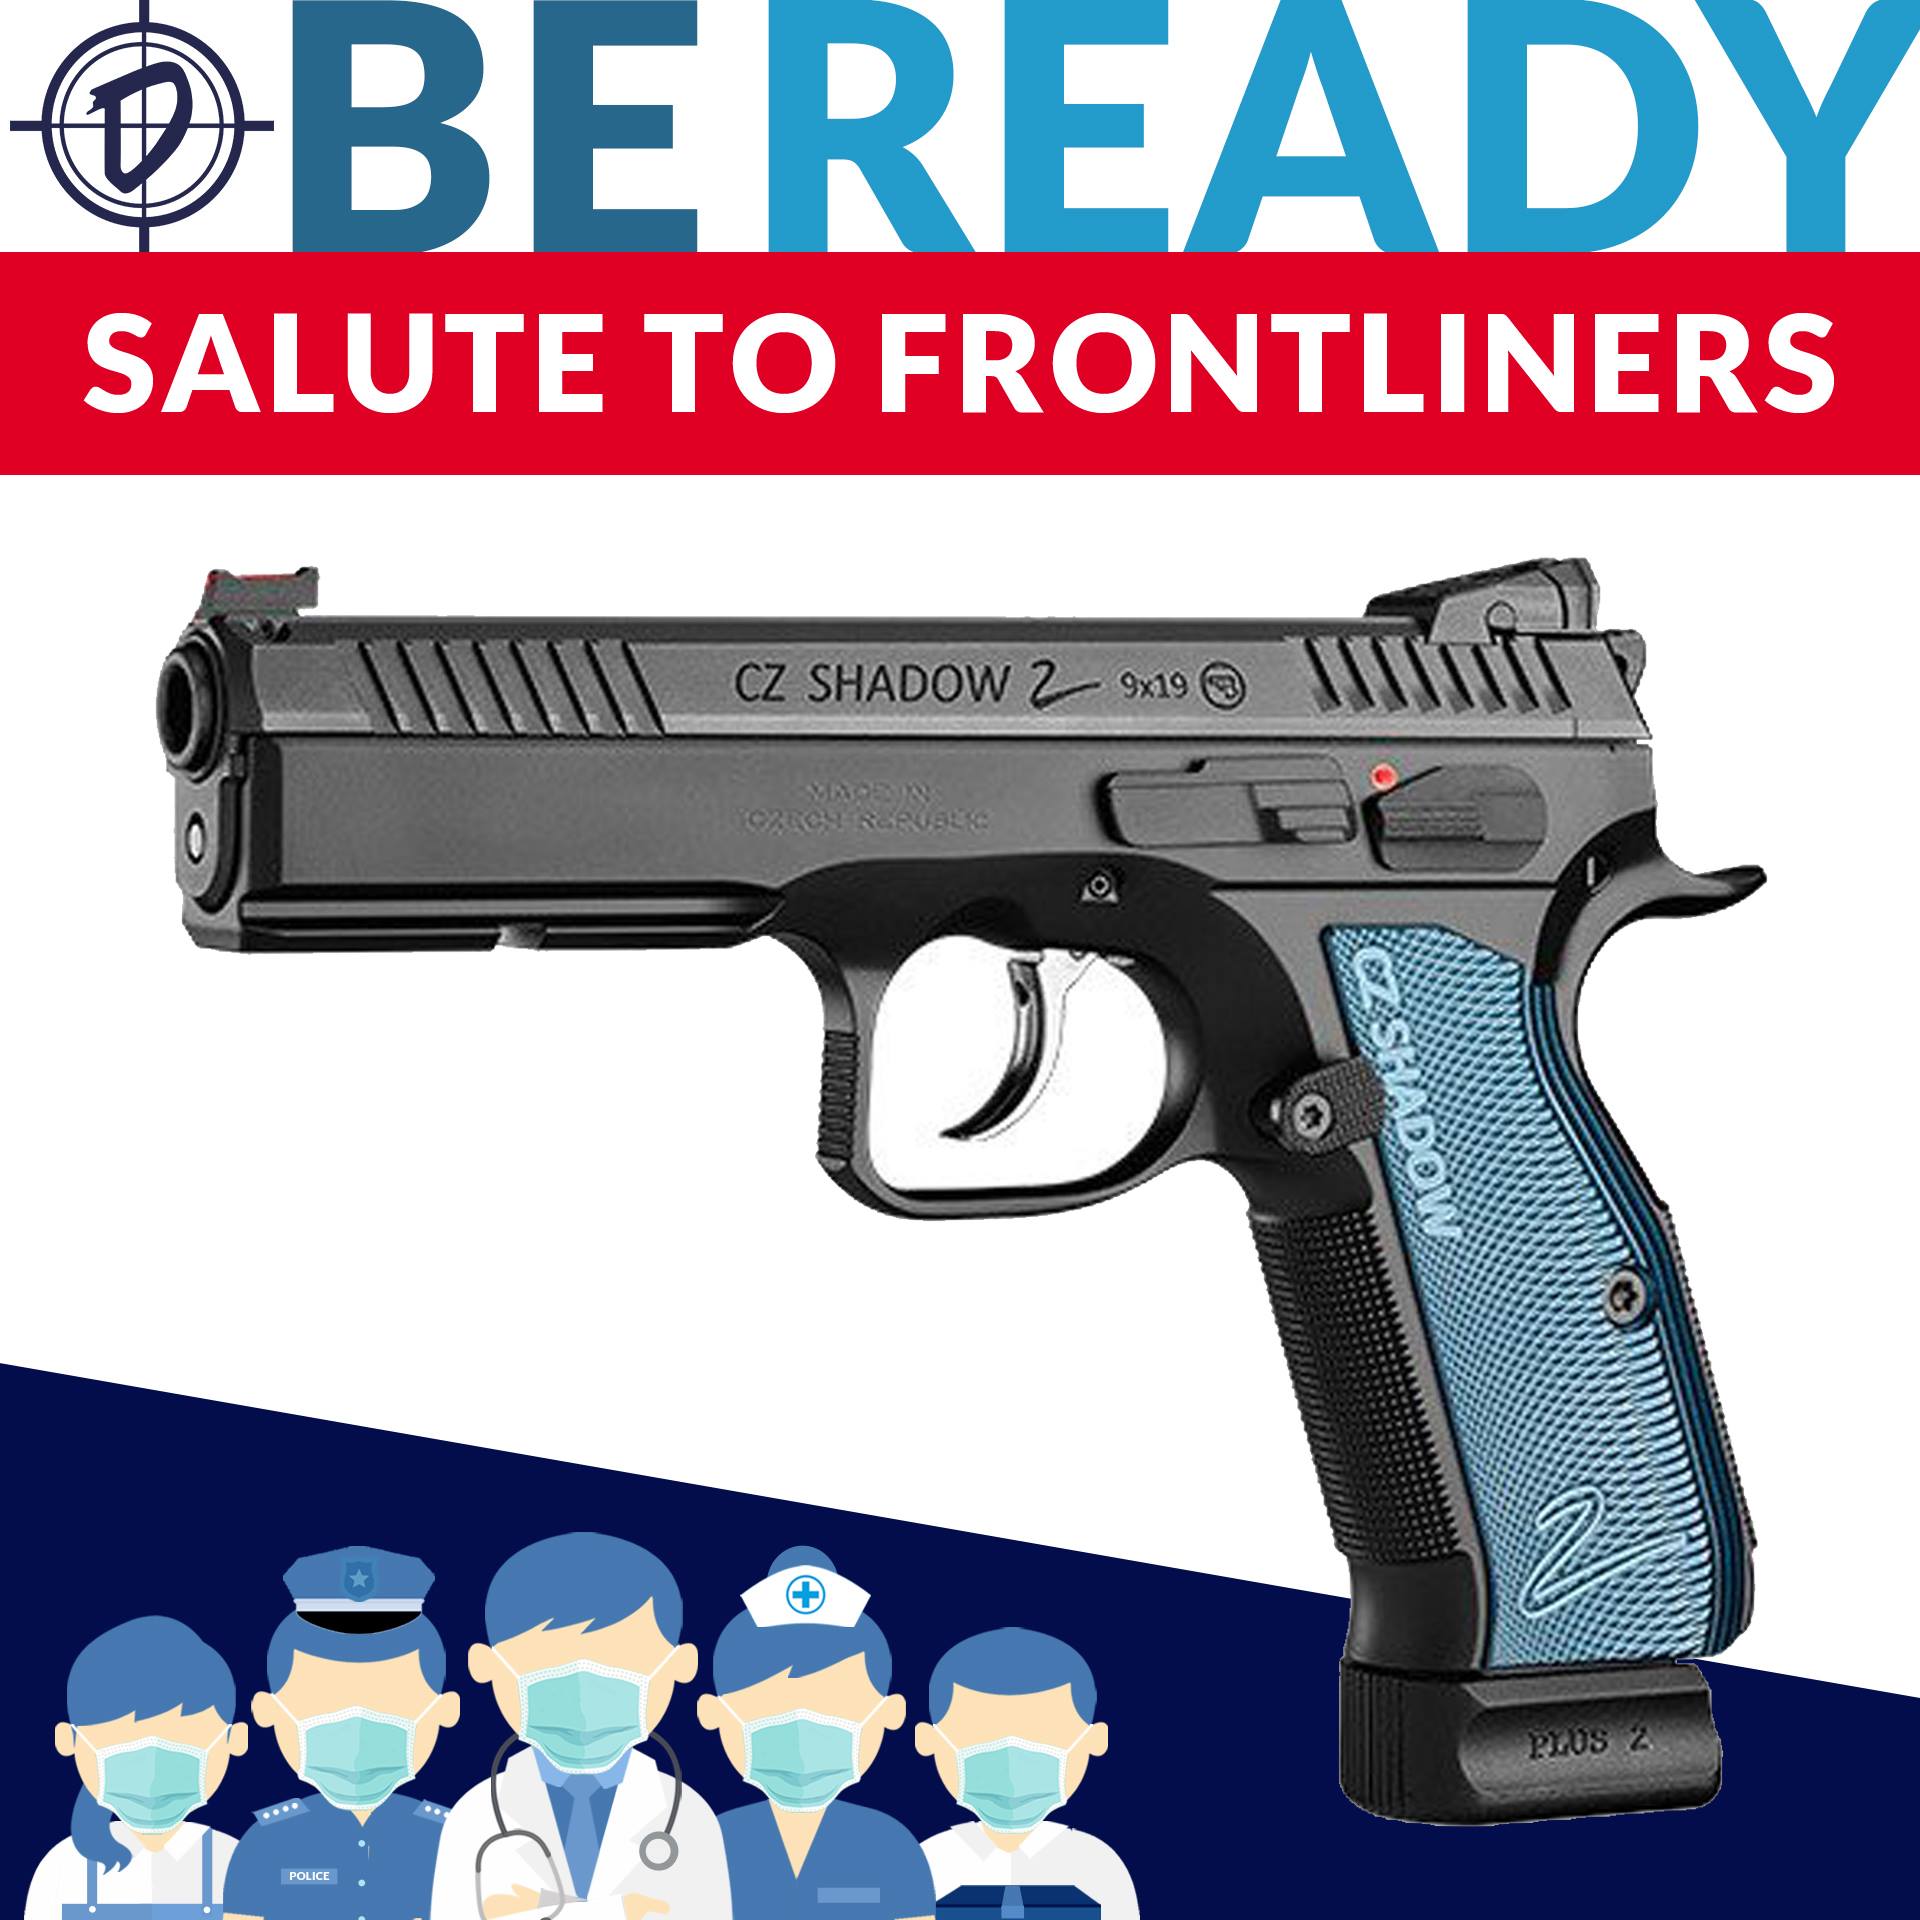 P.B.Dionisio & Co.'s Salute to Frontliners Promo Sale CZ Shadow 2 Blue